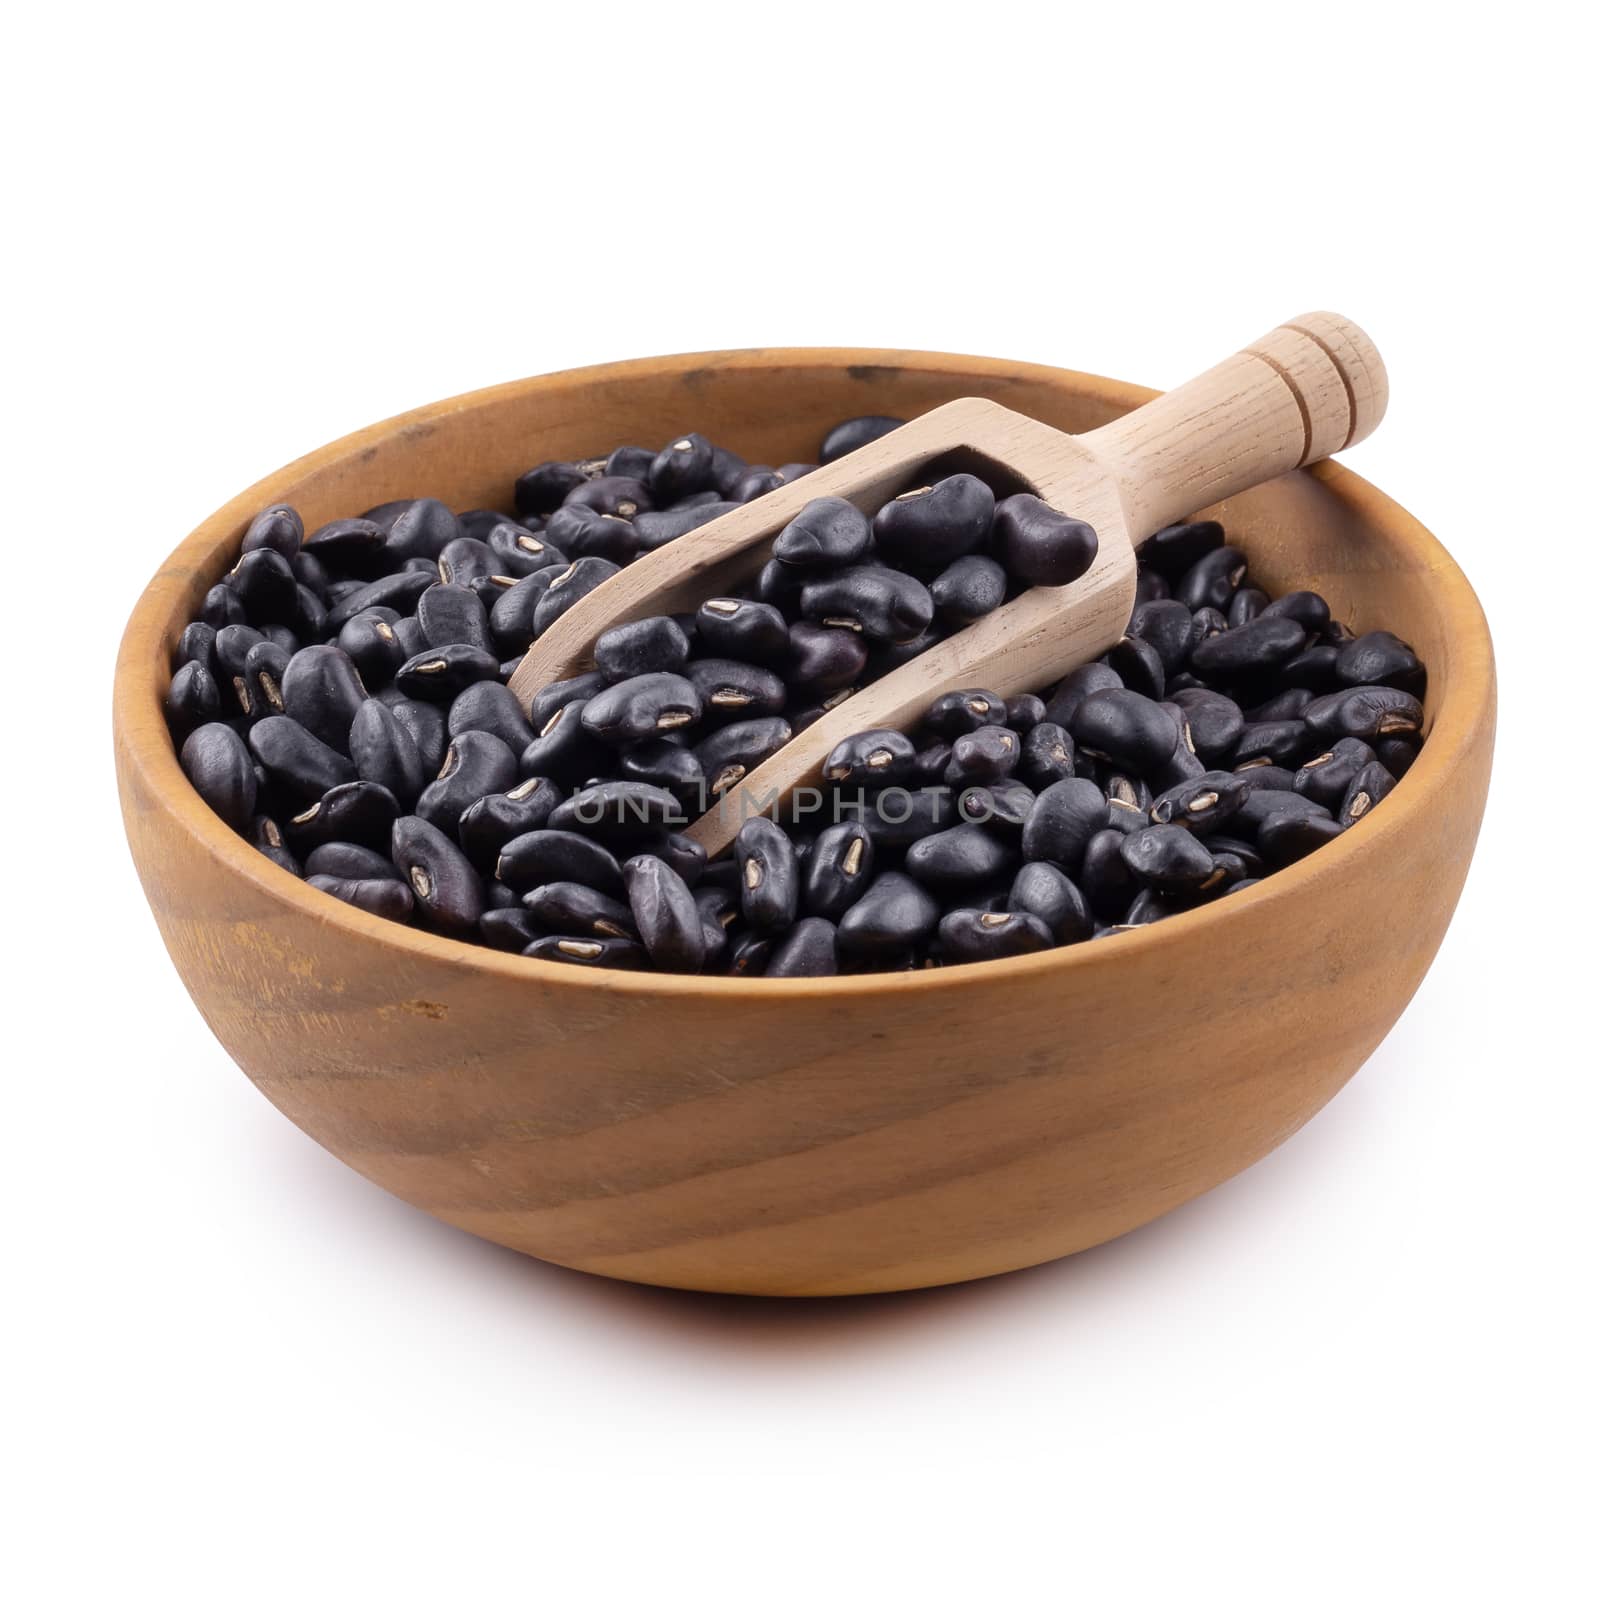 Black bean in a wooden bowl isolated on white background.